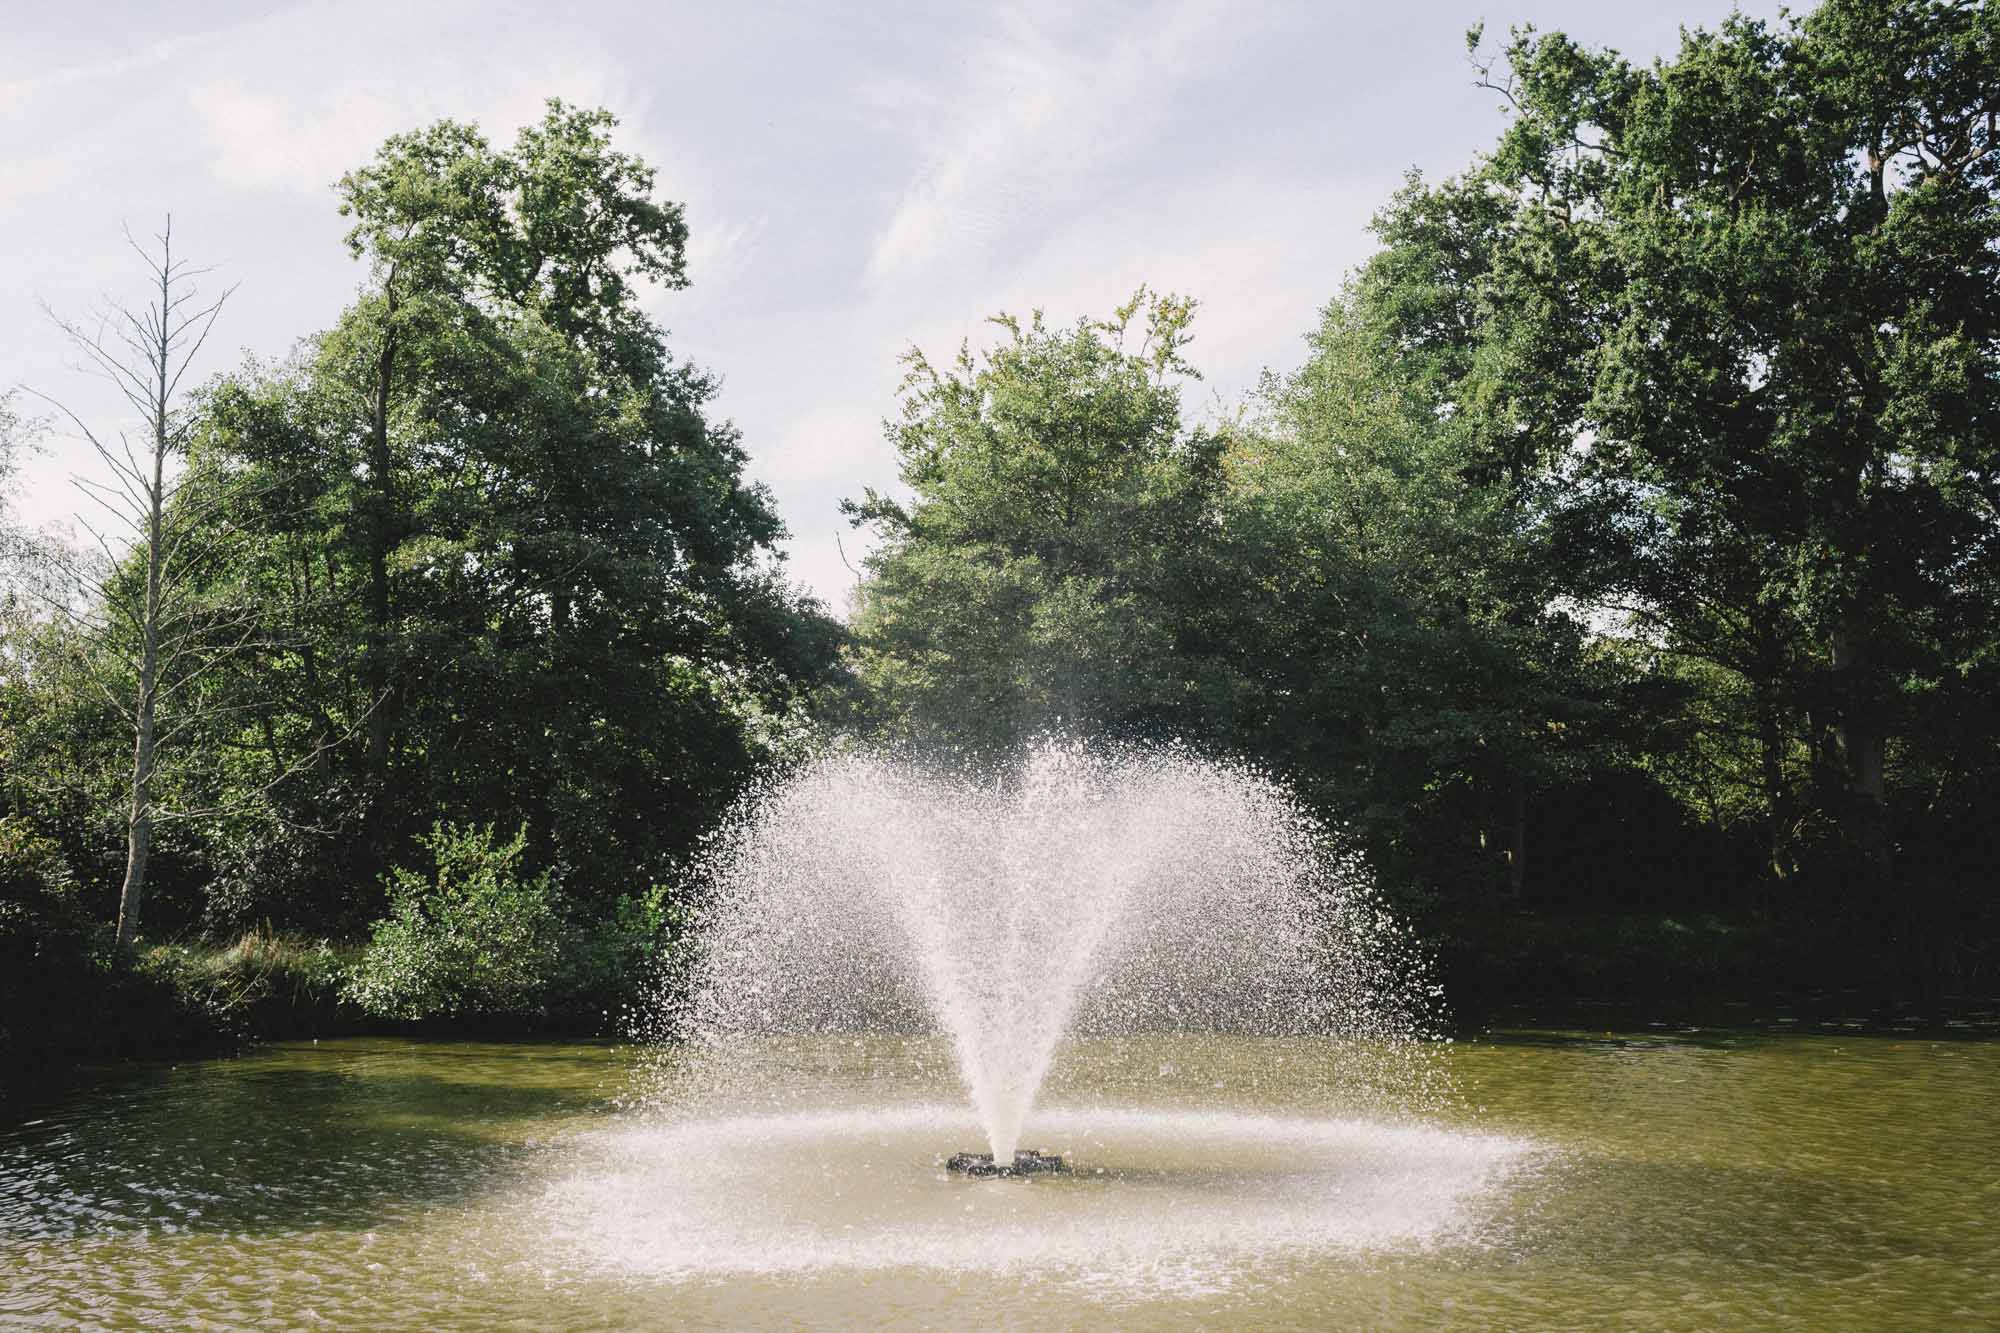 Water fountains at Ashdown Park Wedding Venue in Sussex.